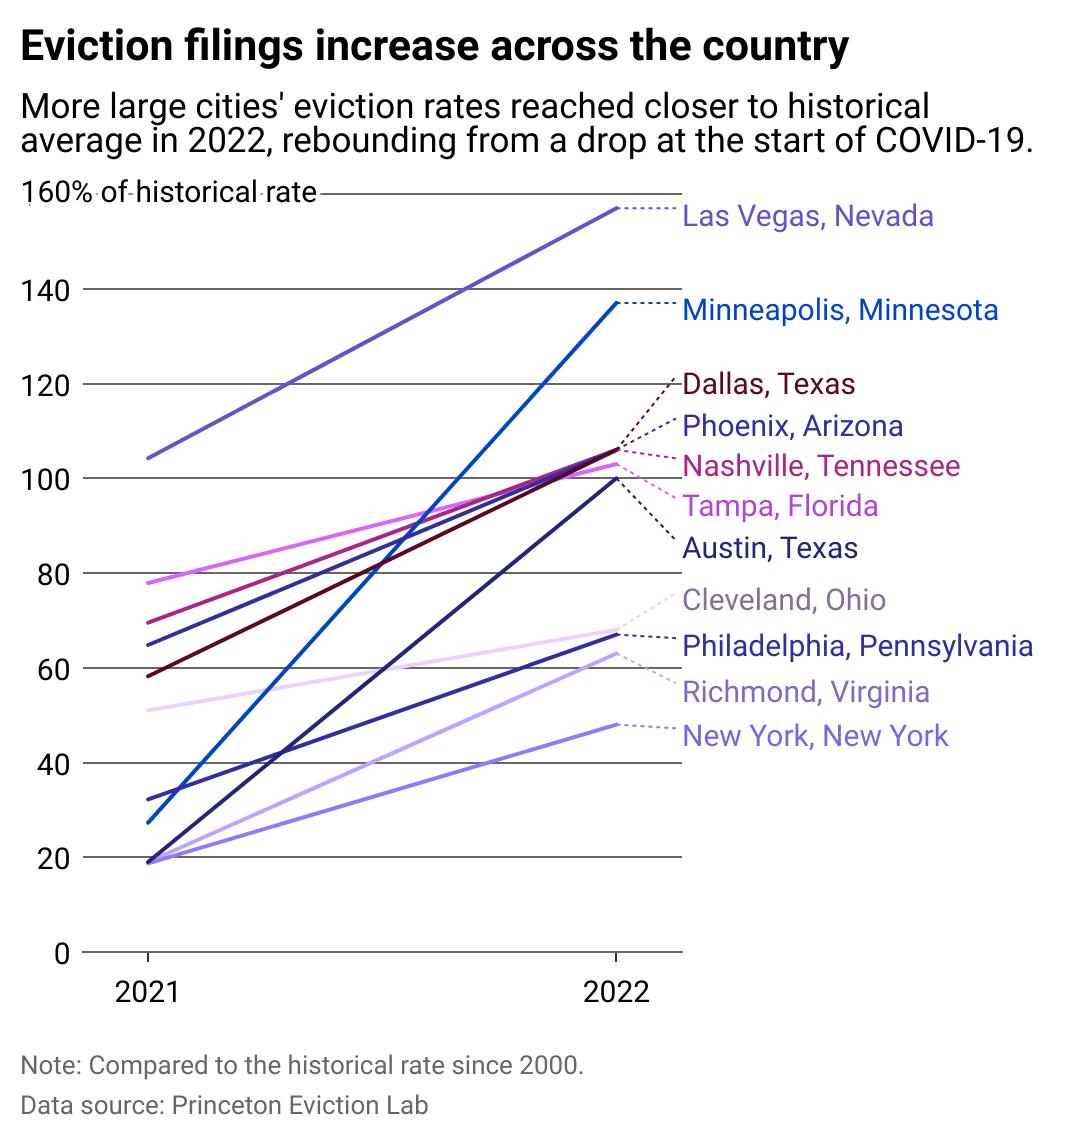 Evictions on the rise, depicted in a graph for 11 cities in the US